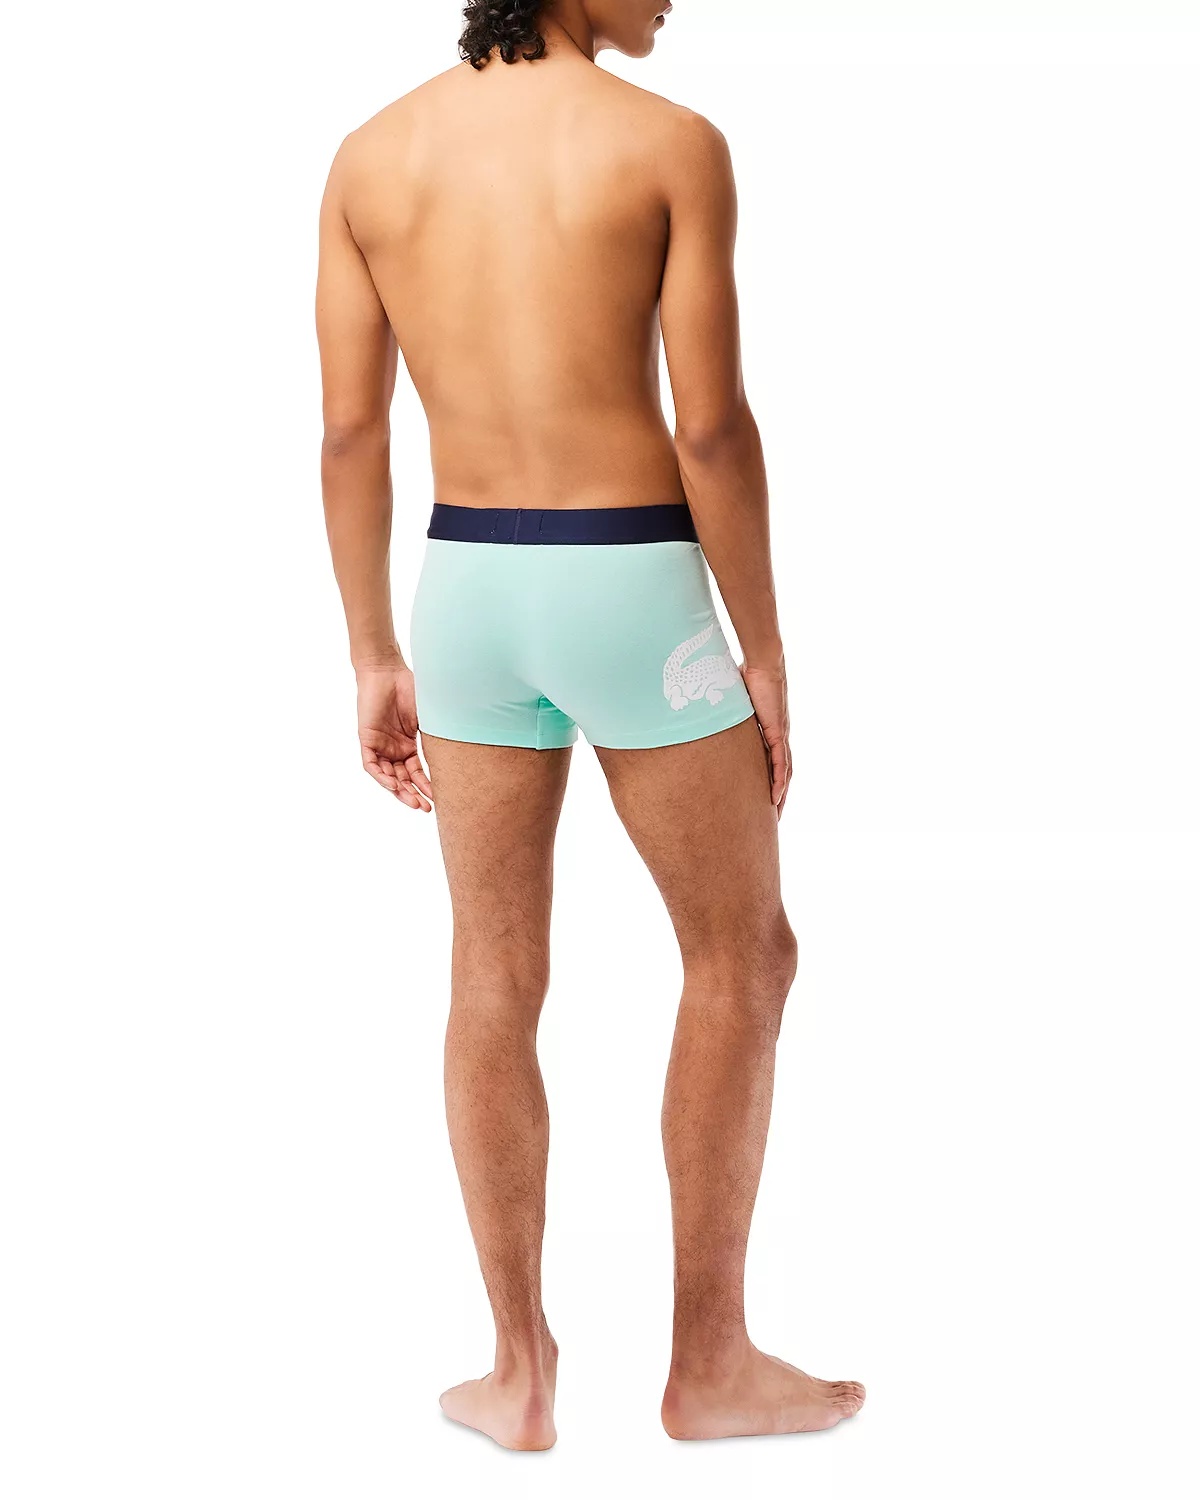 Cotton Stretch Trunks, Pack of 3 - 5